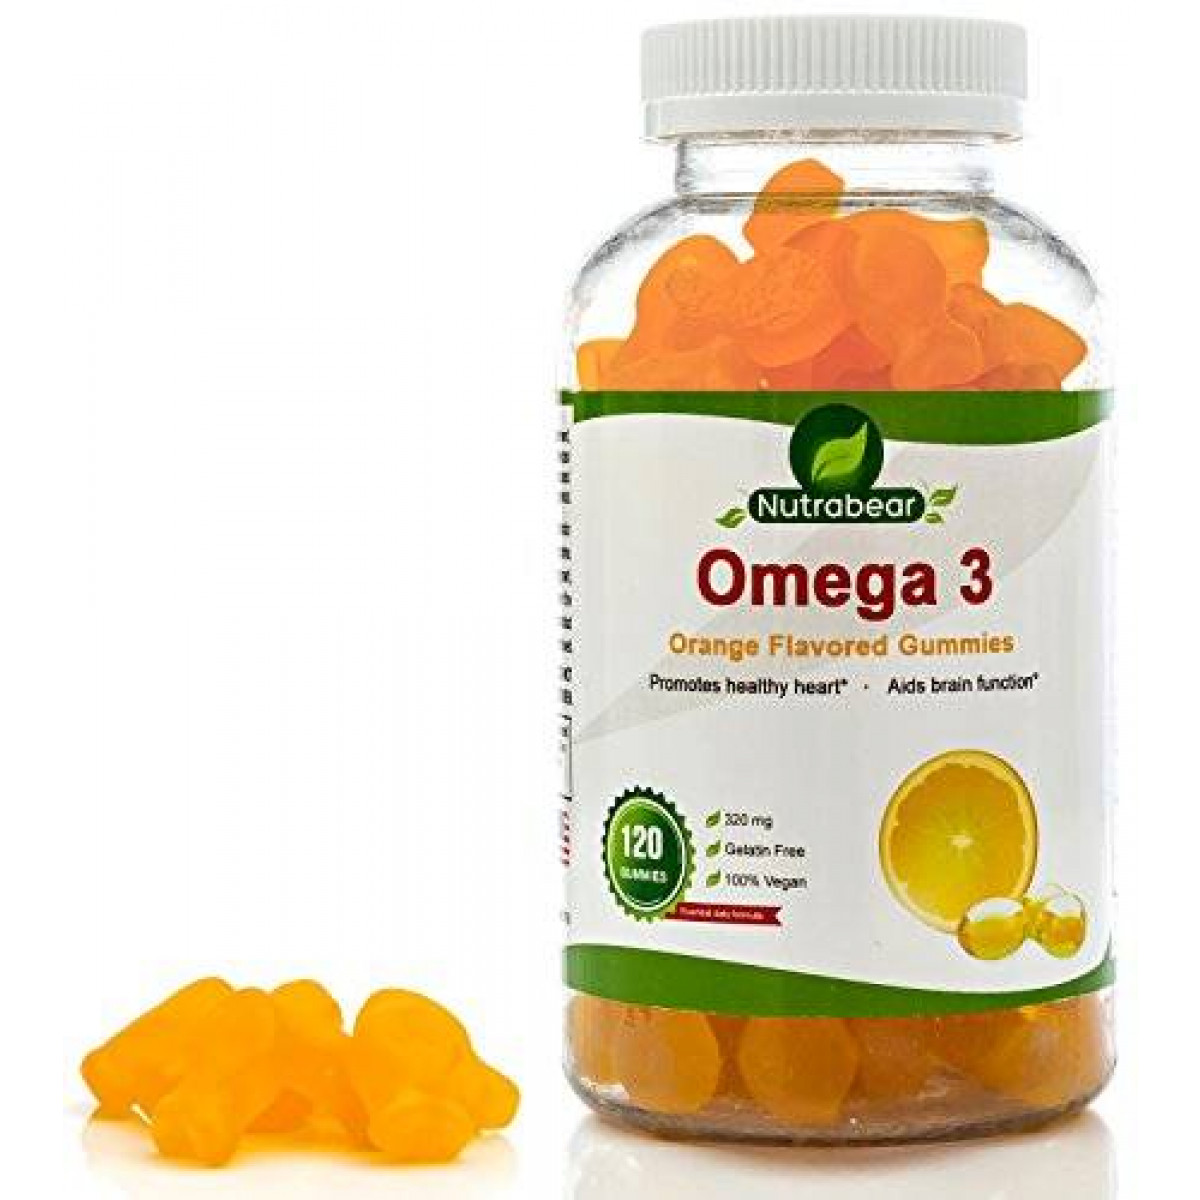 Omega 3 Gummies a Yummy Fish Oil Replacement, 100 Vegan